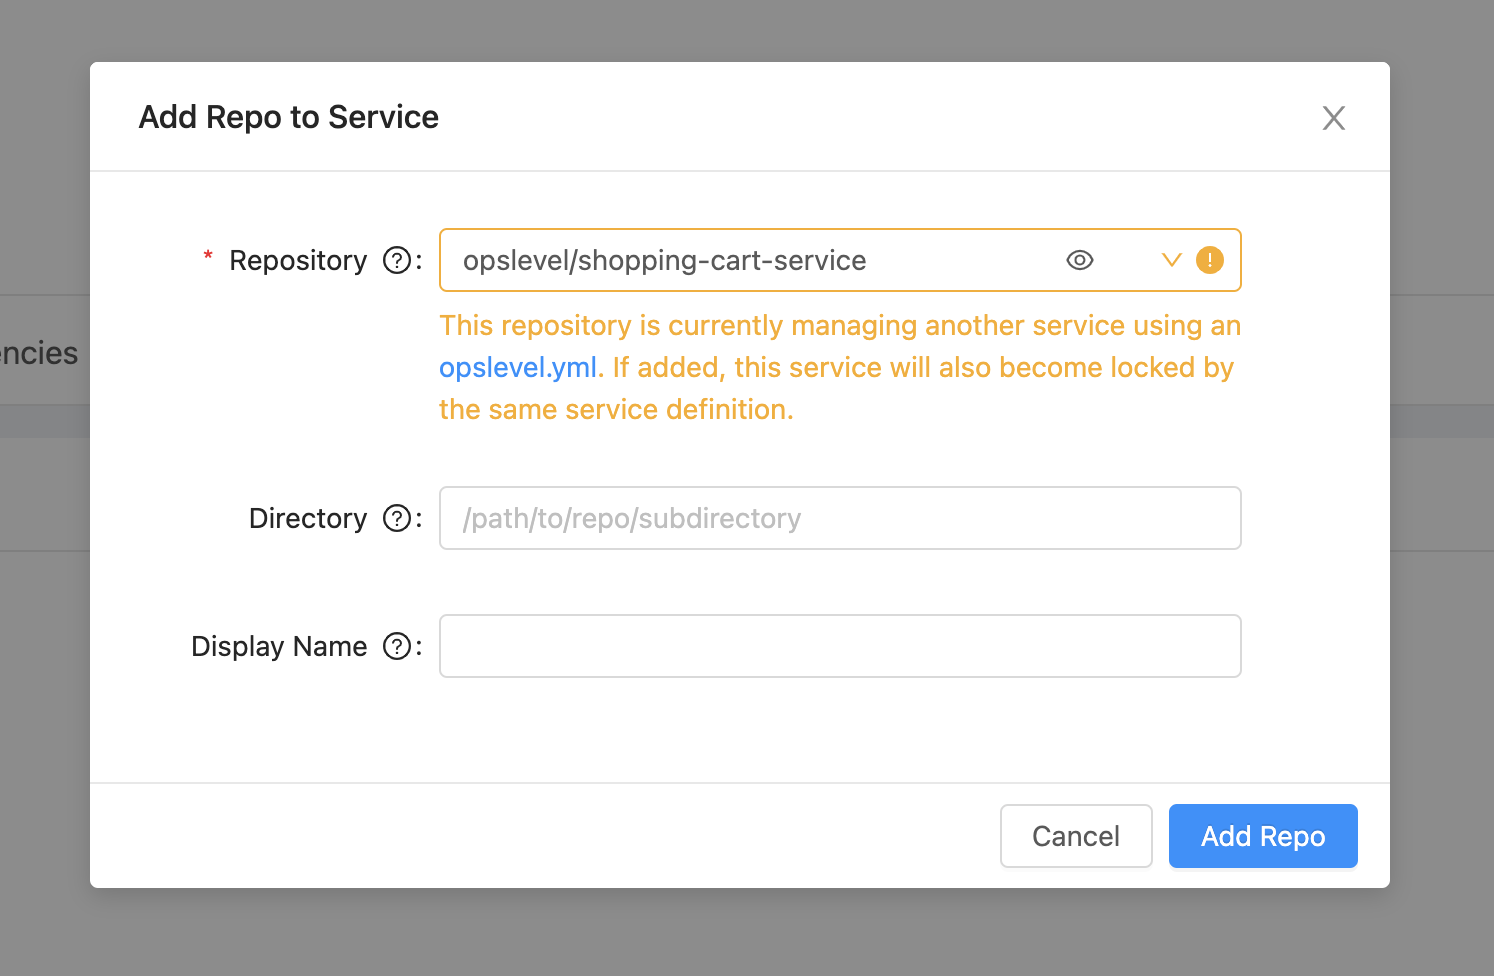 Attaching a Repo that is already attached to a Service will lock the second Service